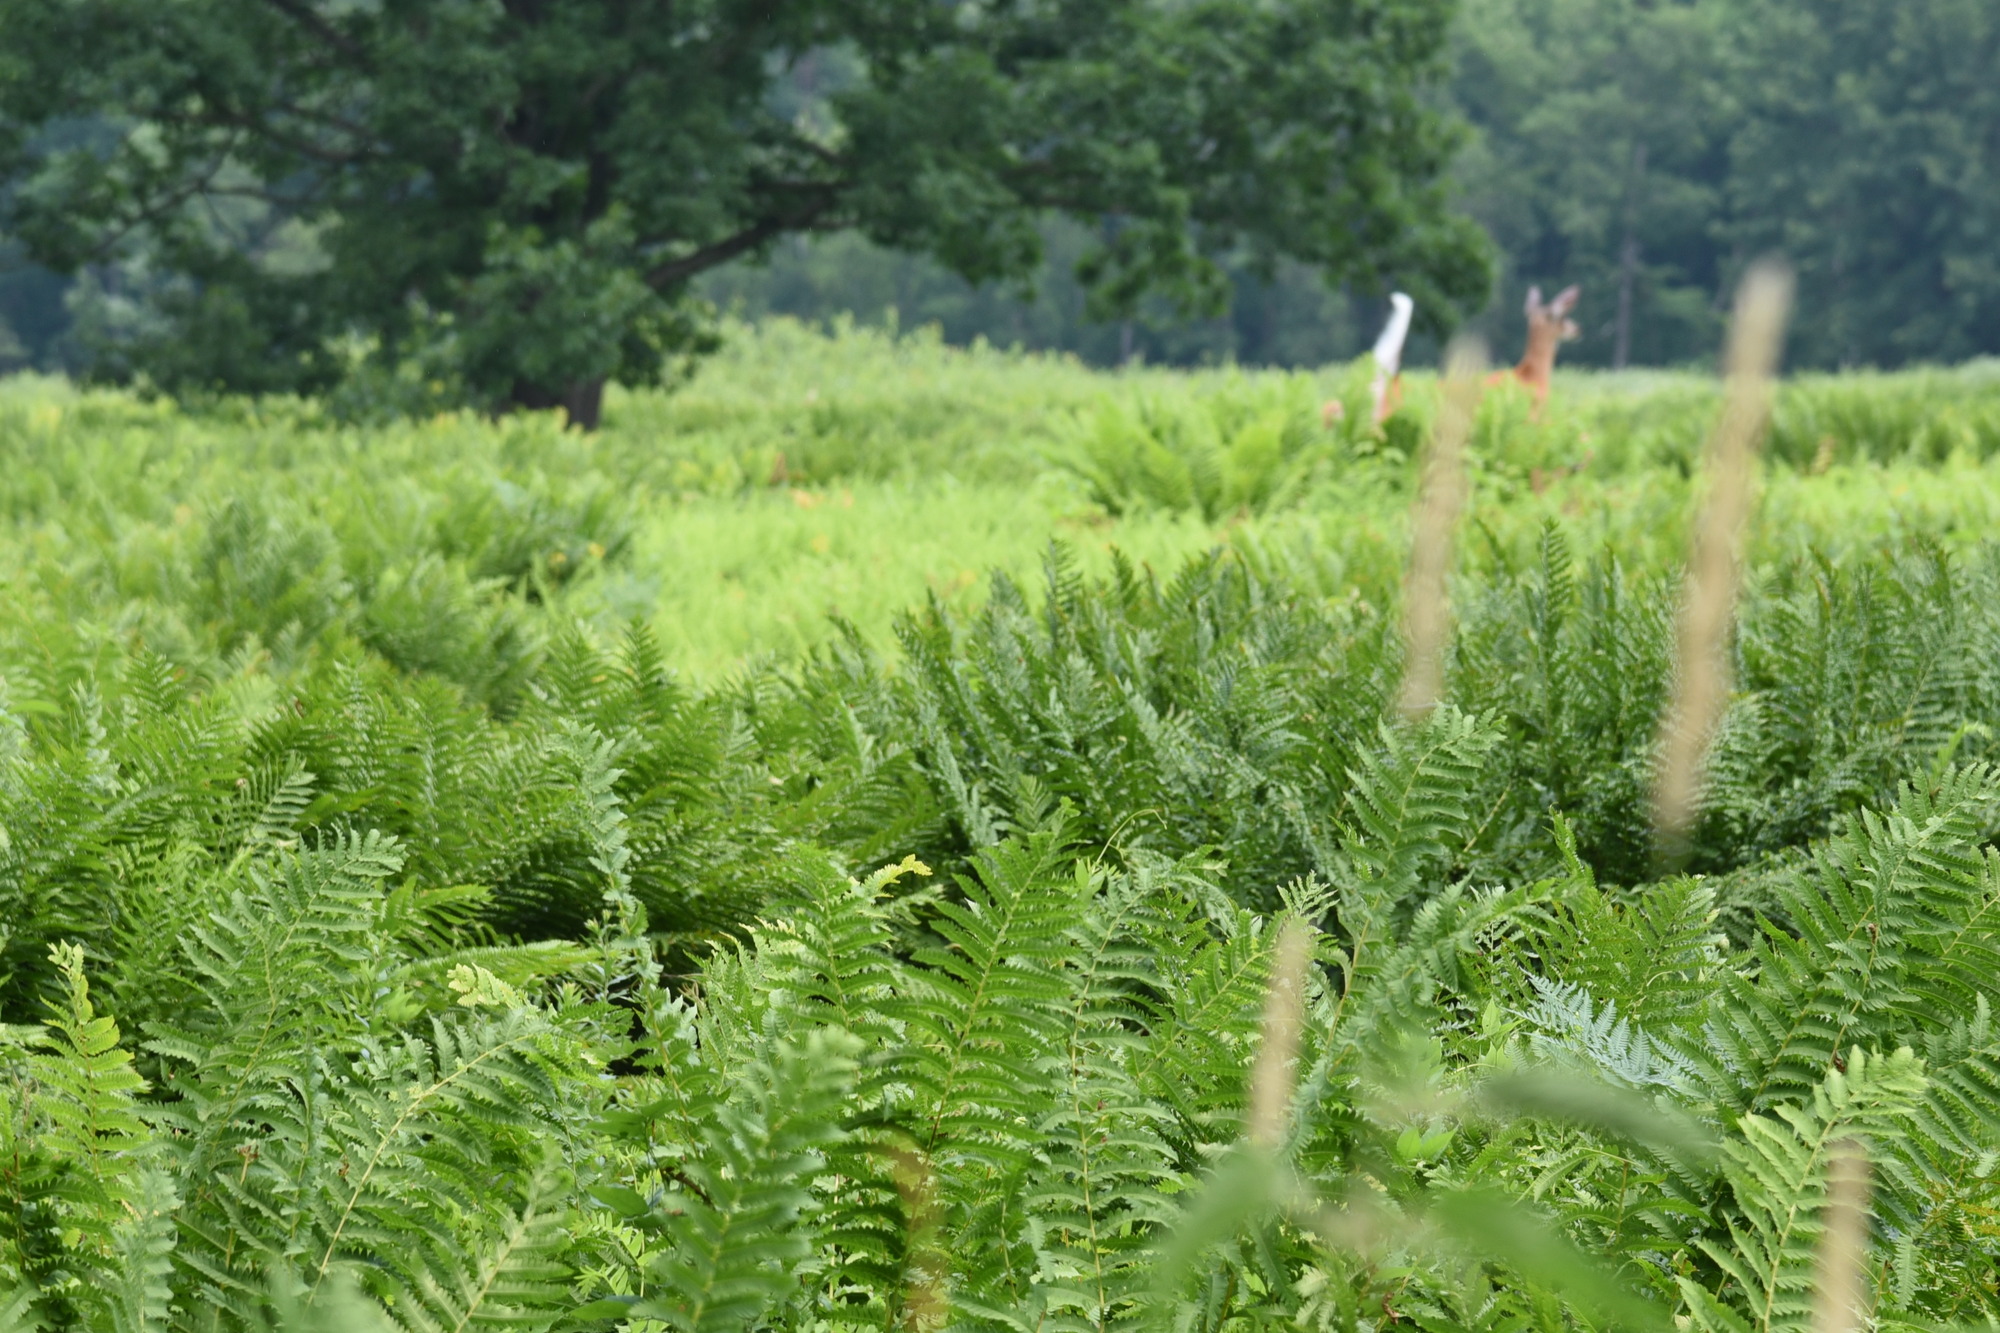 A white tailed deer running away from the camera in a field of ferns.